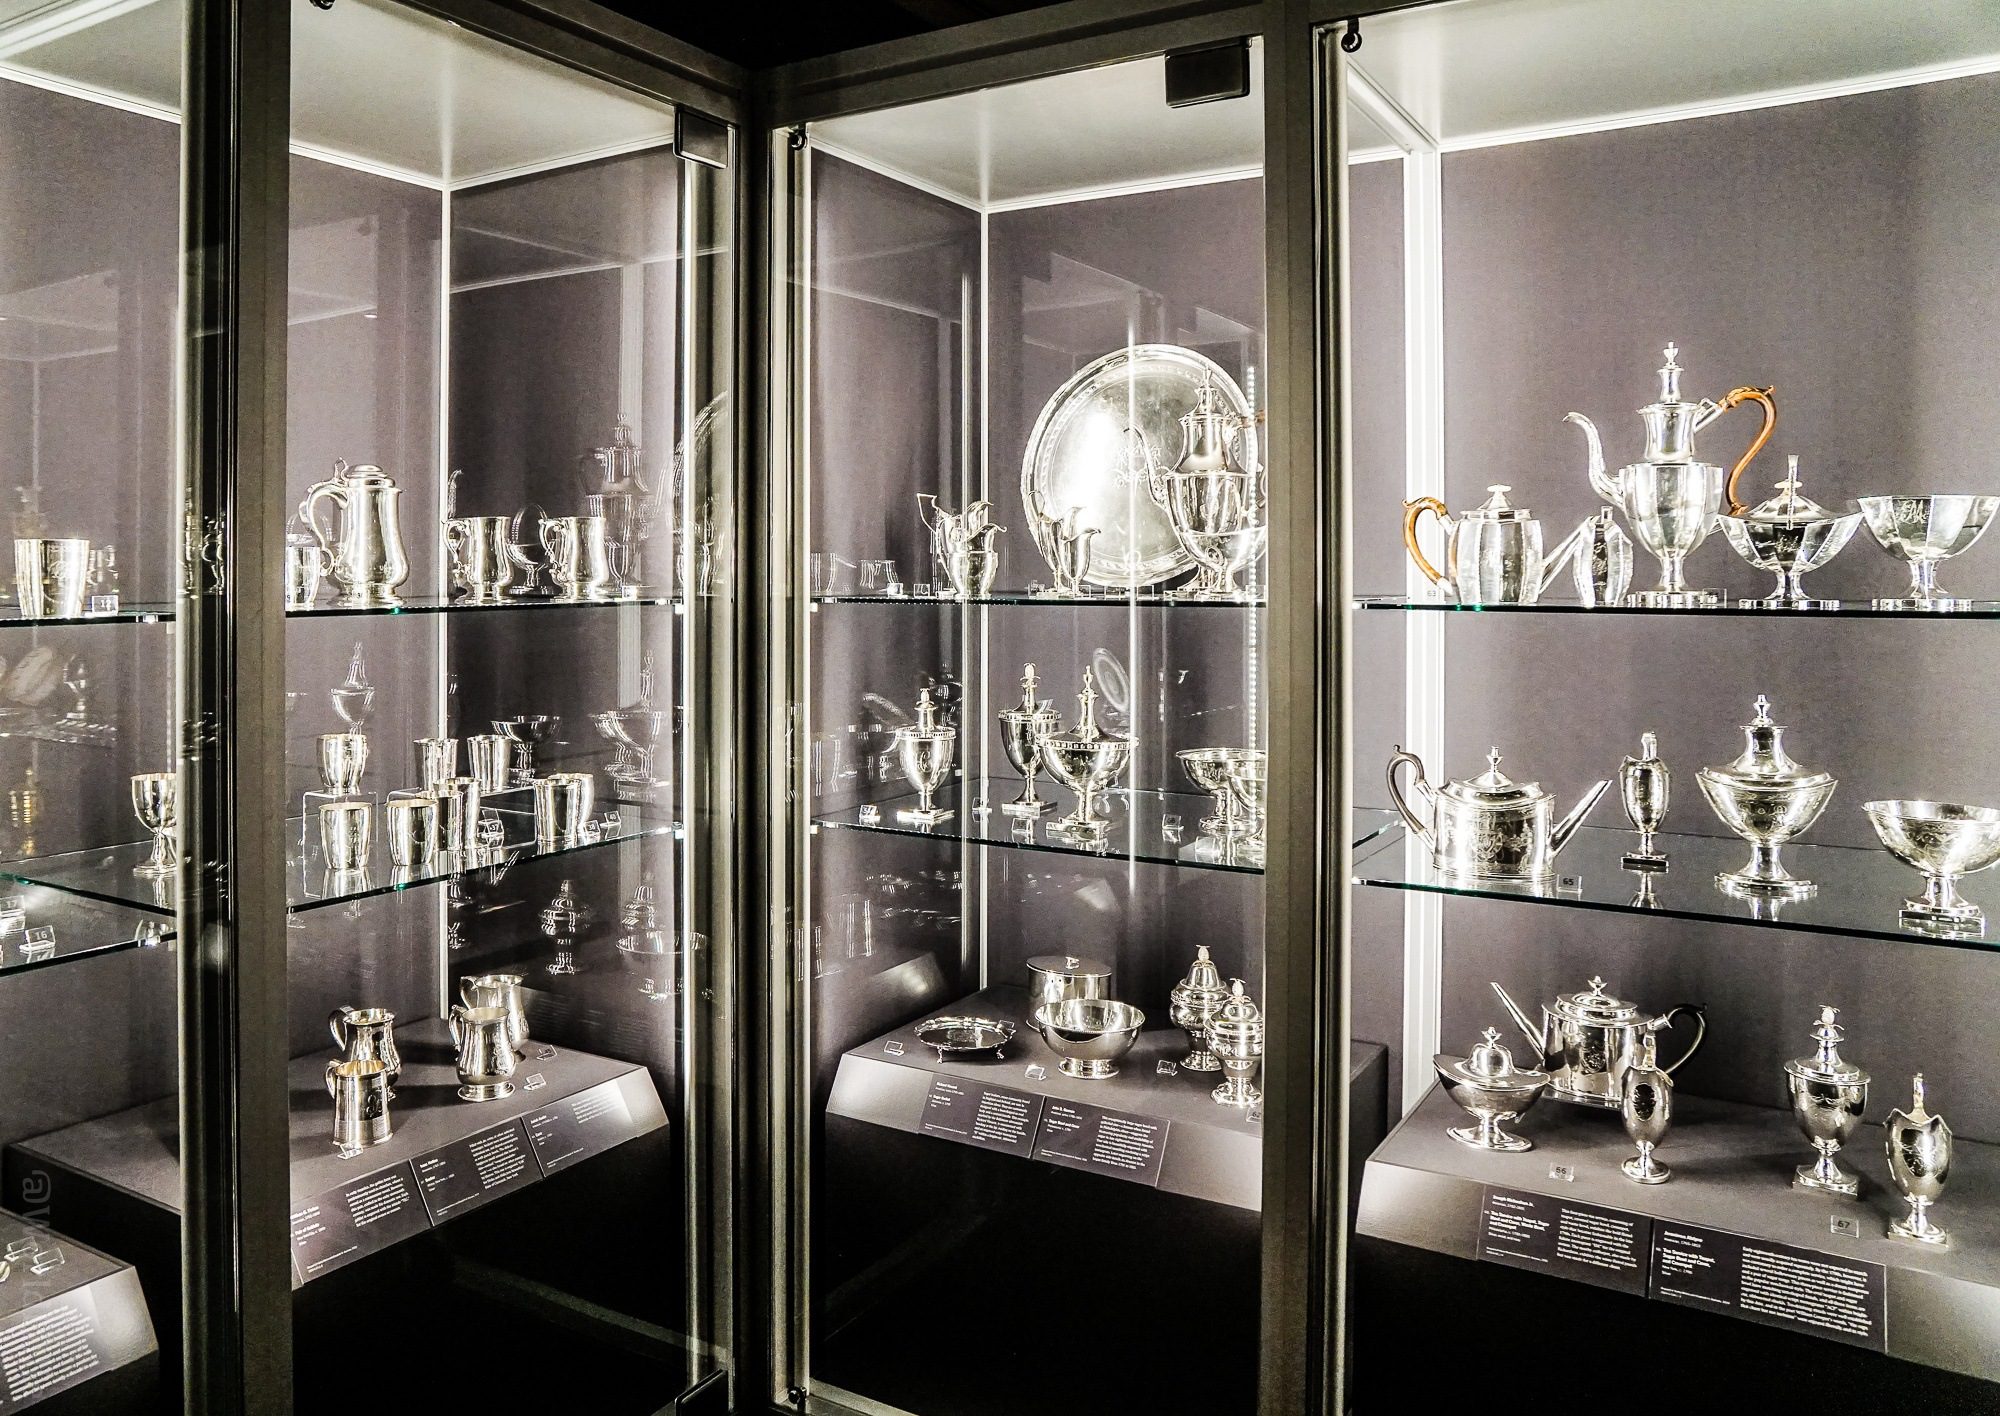 This case of silver in the Clark Museum reflected our caged thoughts.